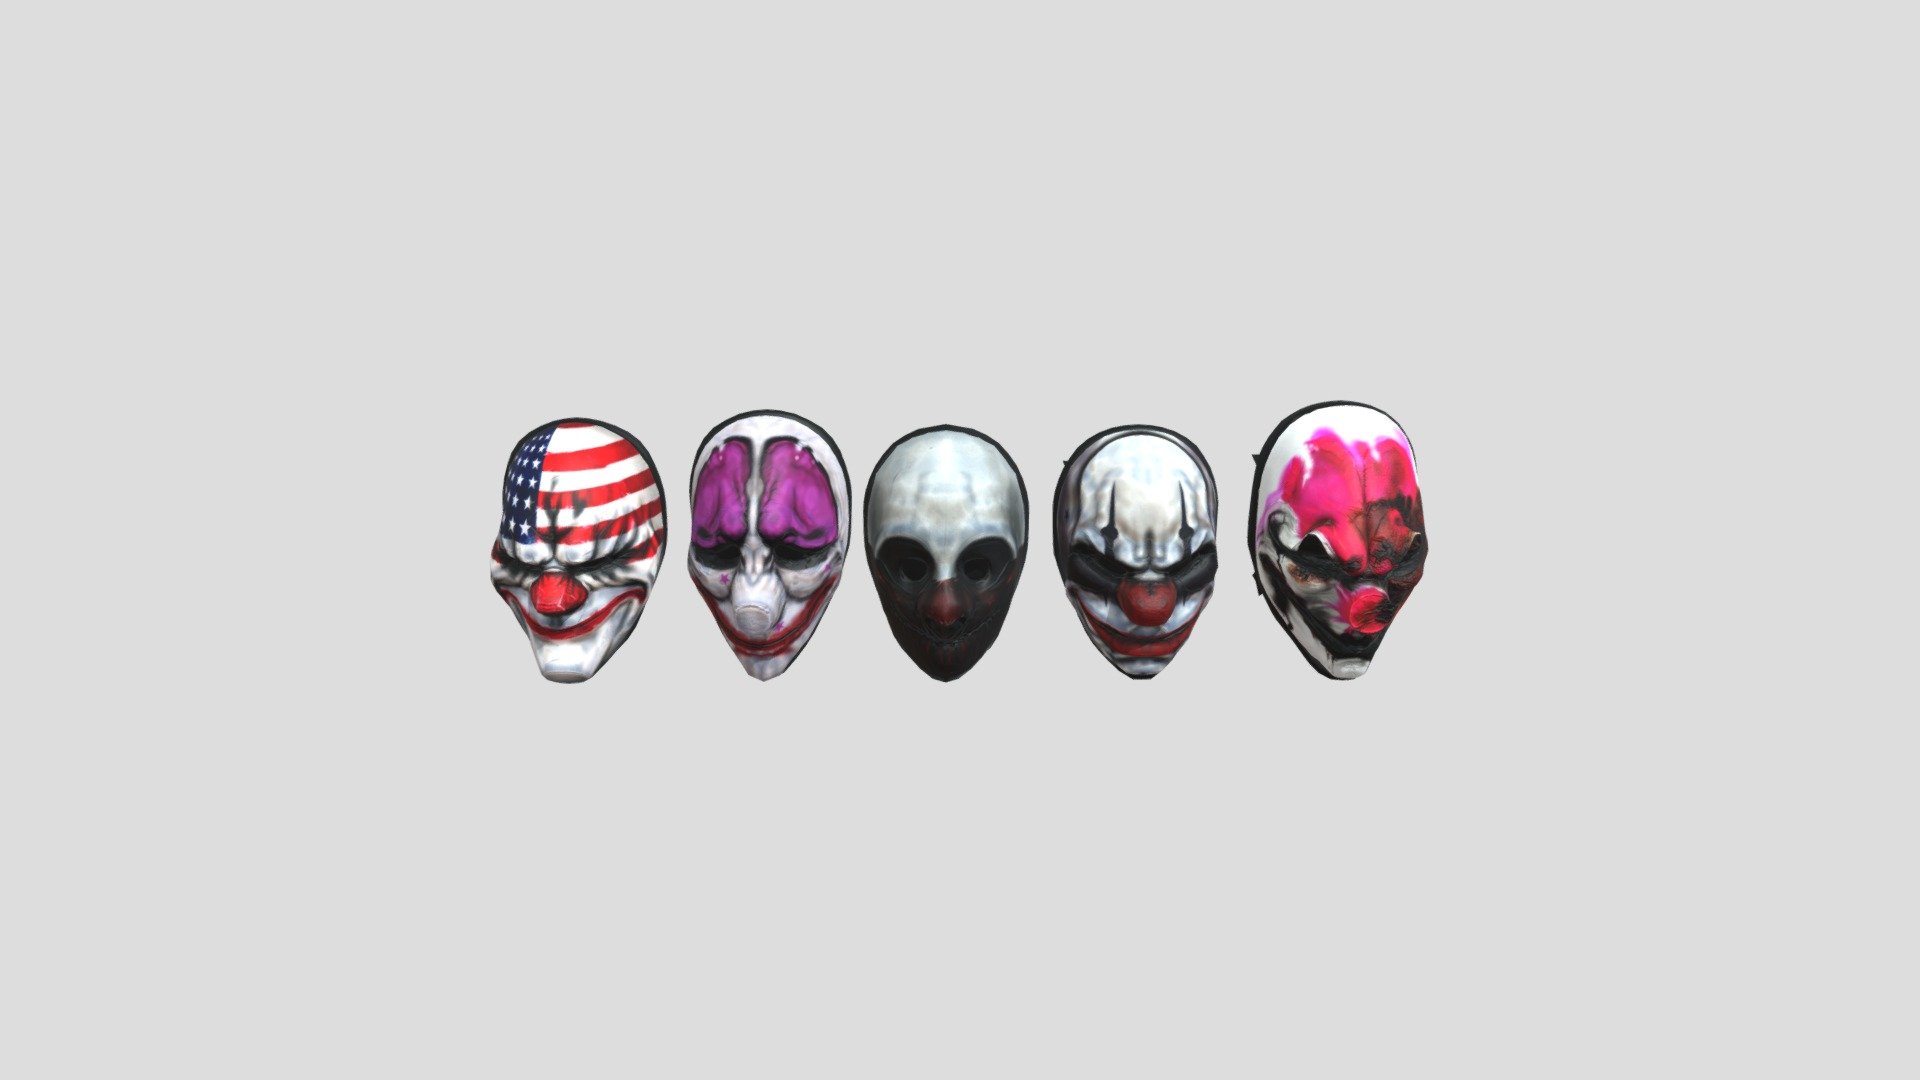 Character masks from Payday 2 (Dallas, Houston, Wolf, Chains, Hoxton)

Upscaled textures (Diffuse, Height) from 512 to 2k
Remeshed and subdivided geometry

Contact me if you want to download it - Payday 2 Masks - 3D model by alexn1k 3d model